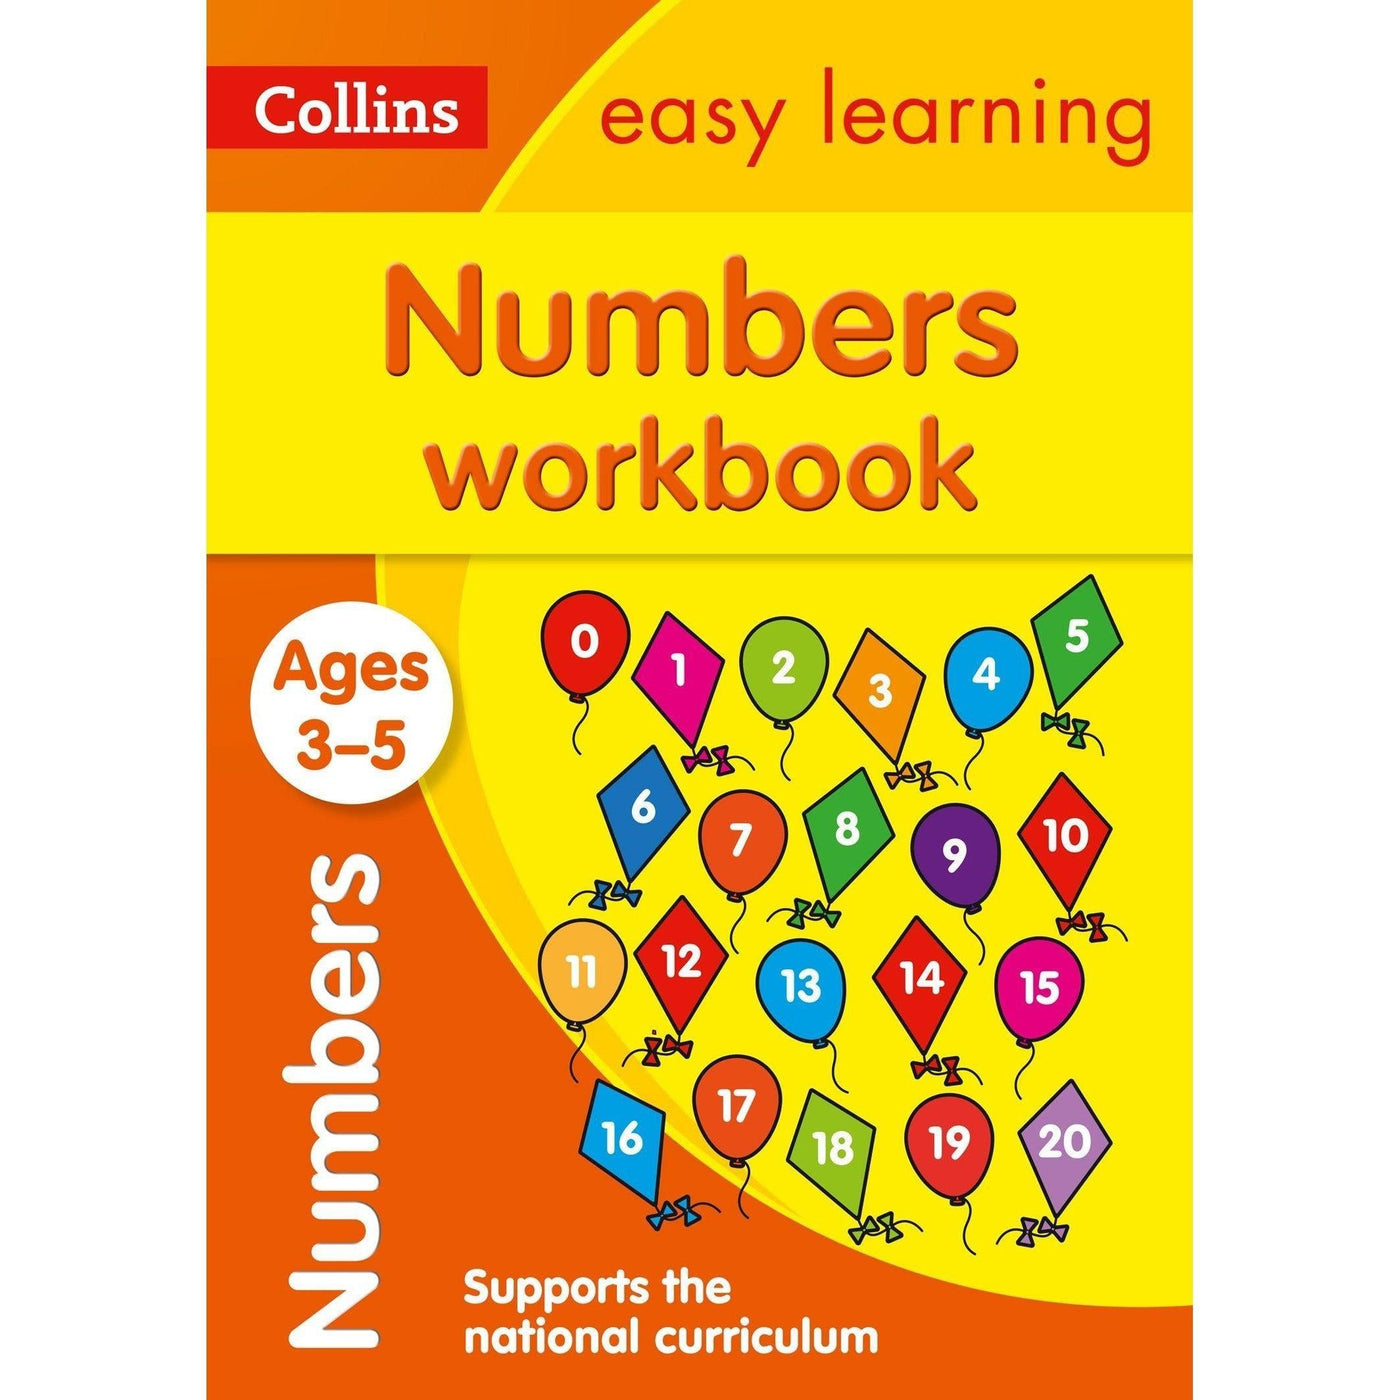 Numbers Workbook Ages 3-5: Prepare for Preschool with easy home learning (Collins Easy Learning Preschool)